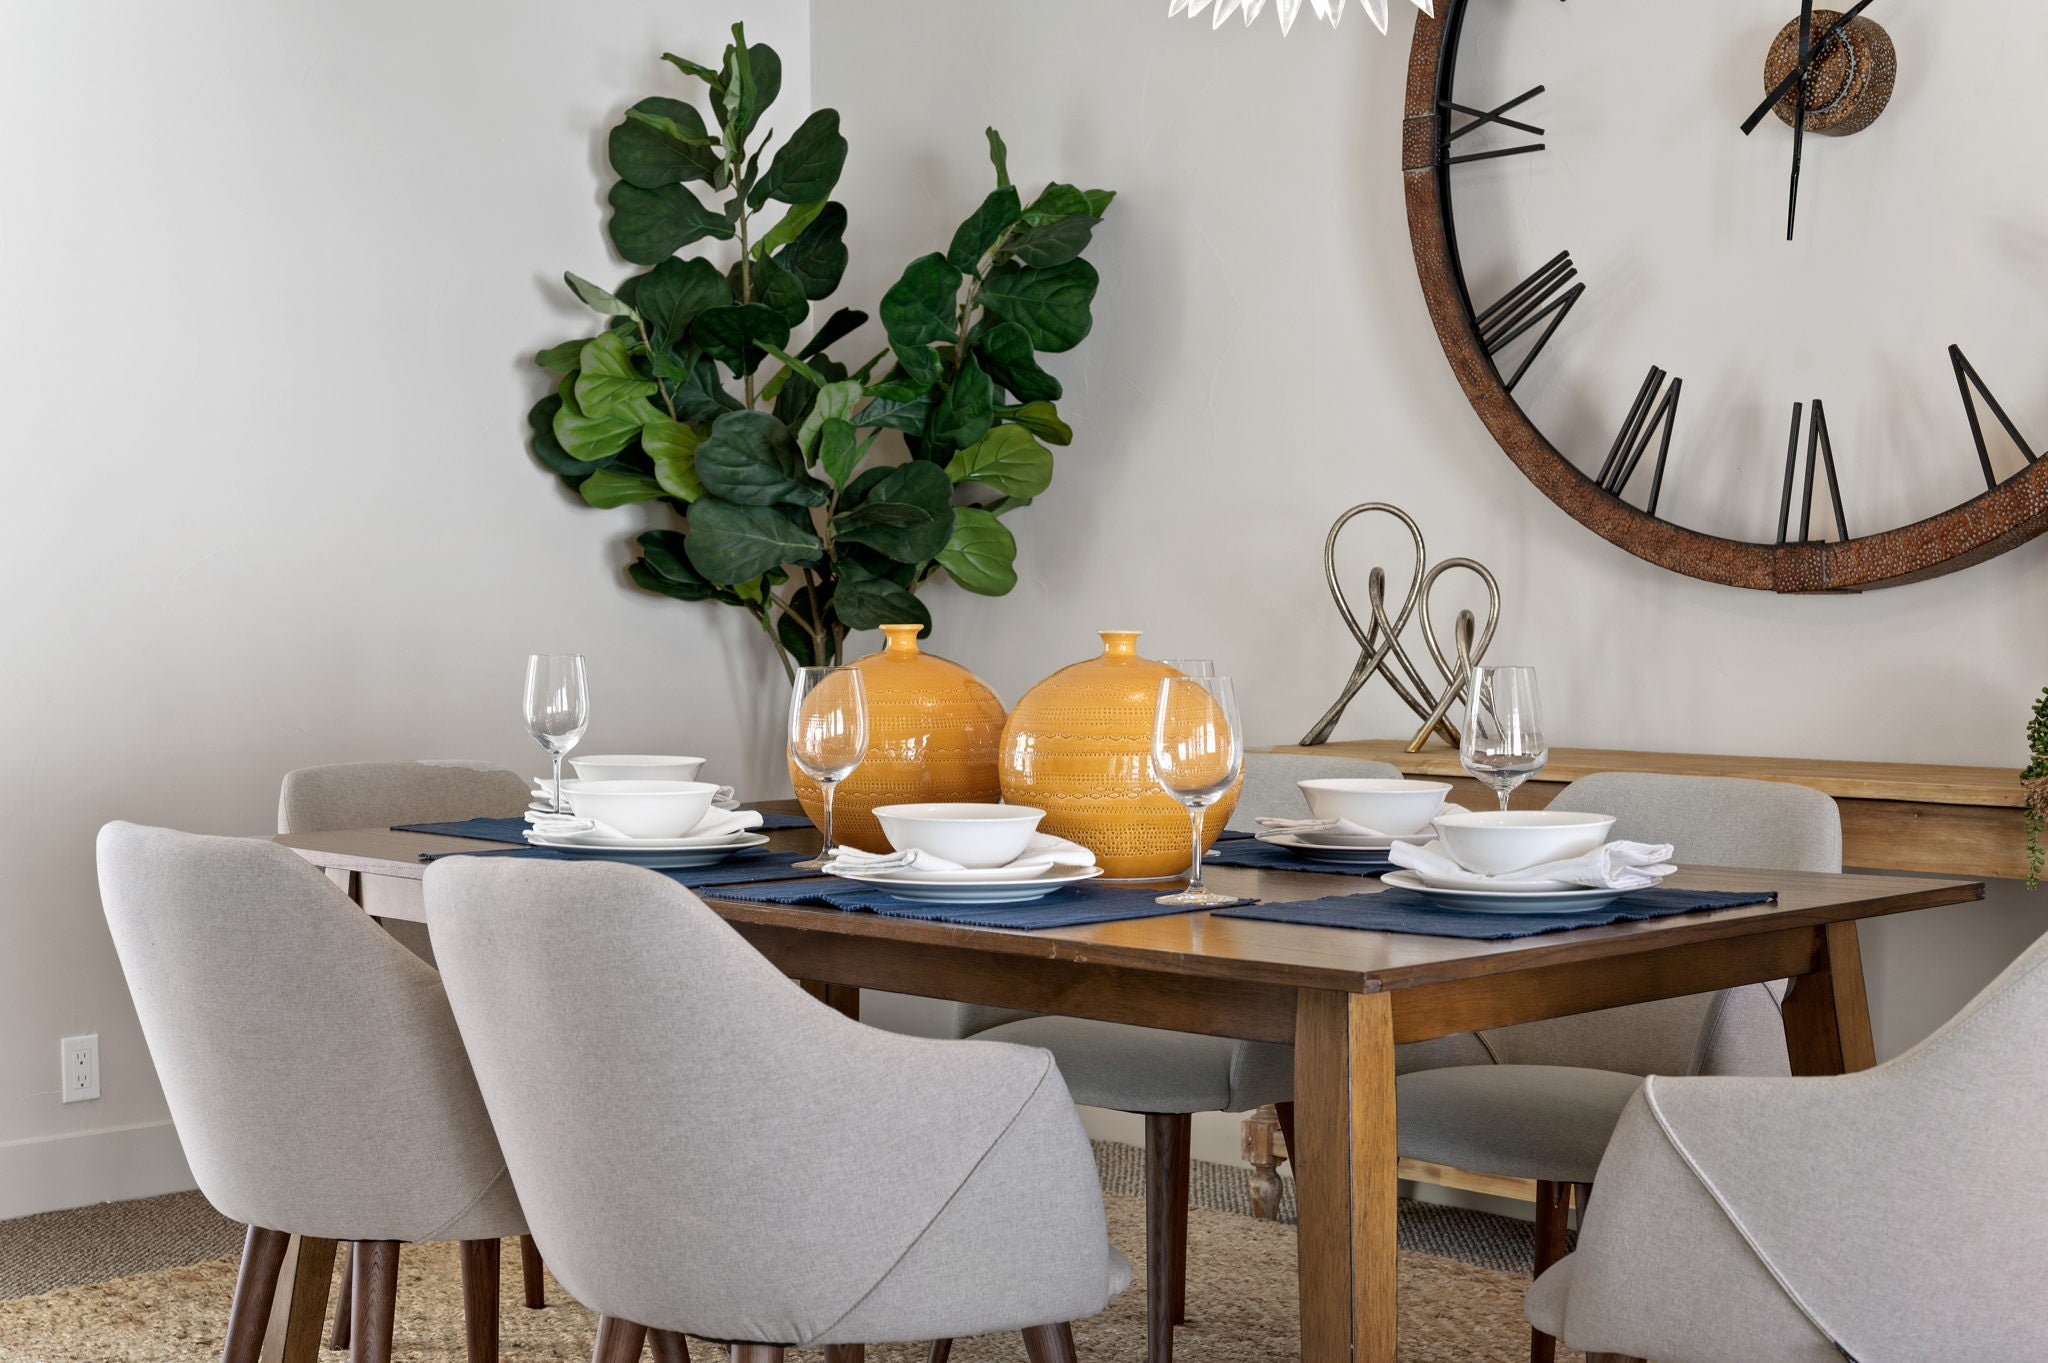 Why Stage -Find the top reasons to stage your home- Staged dining room table